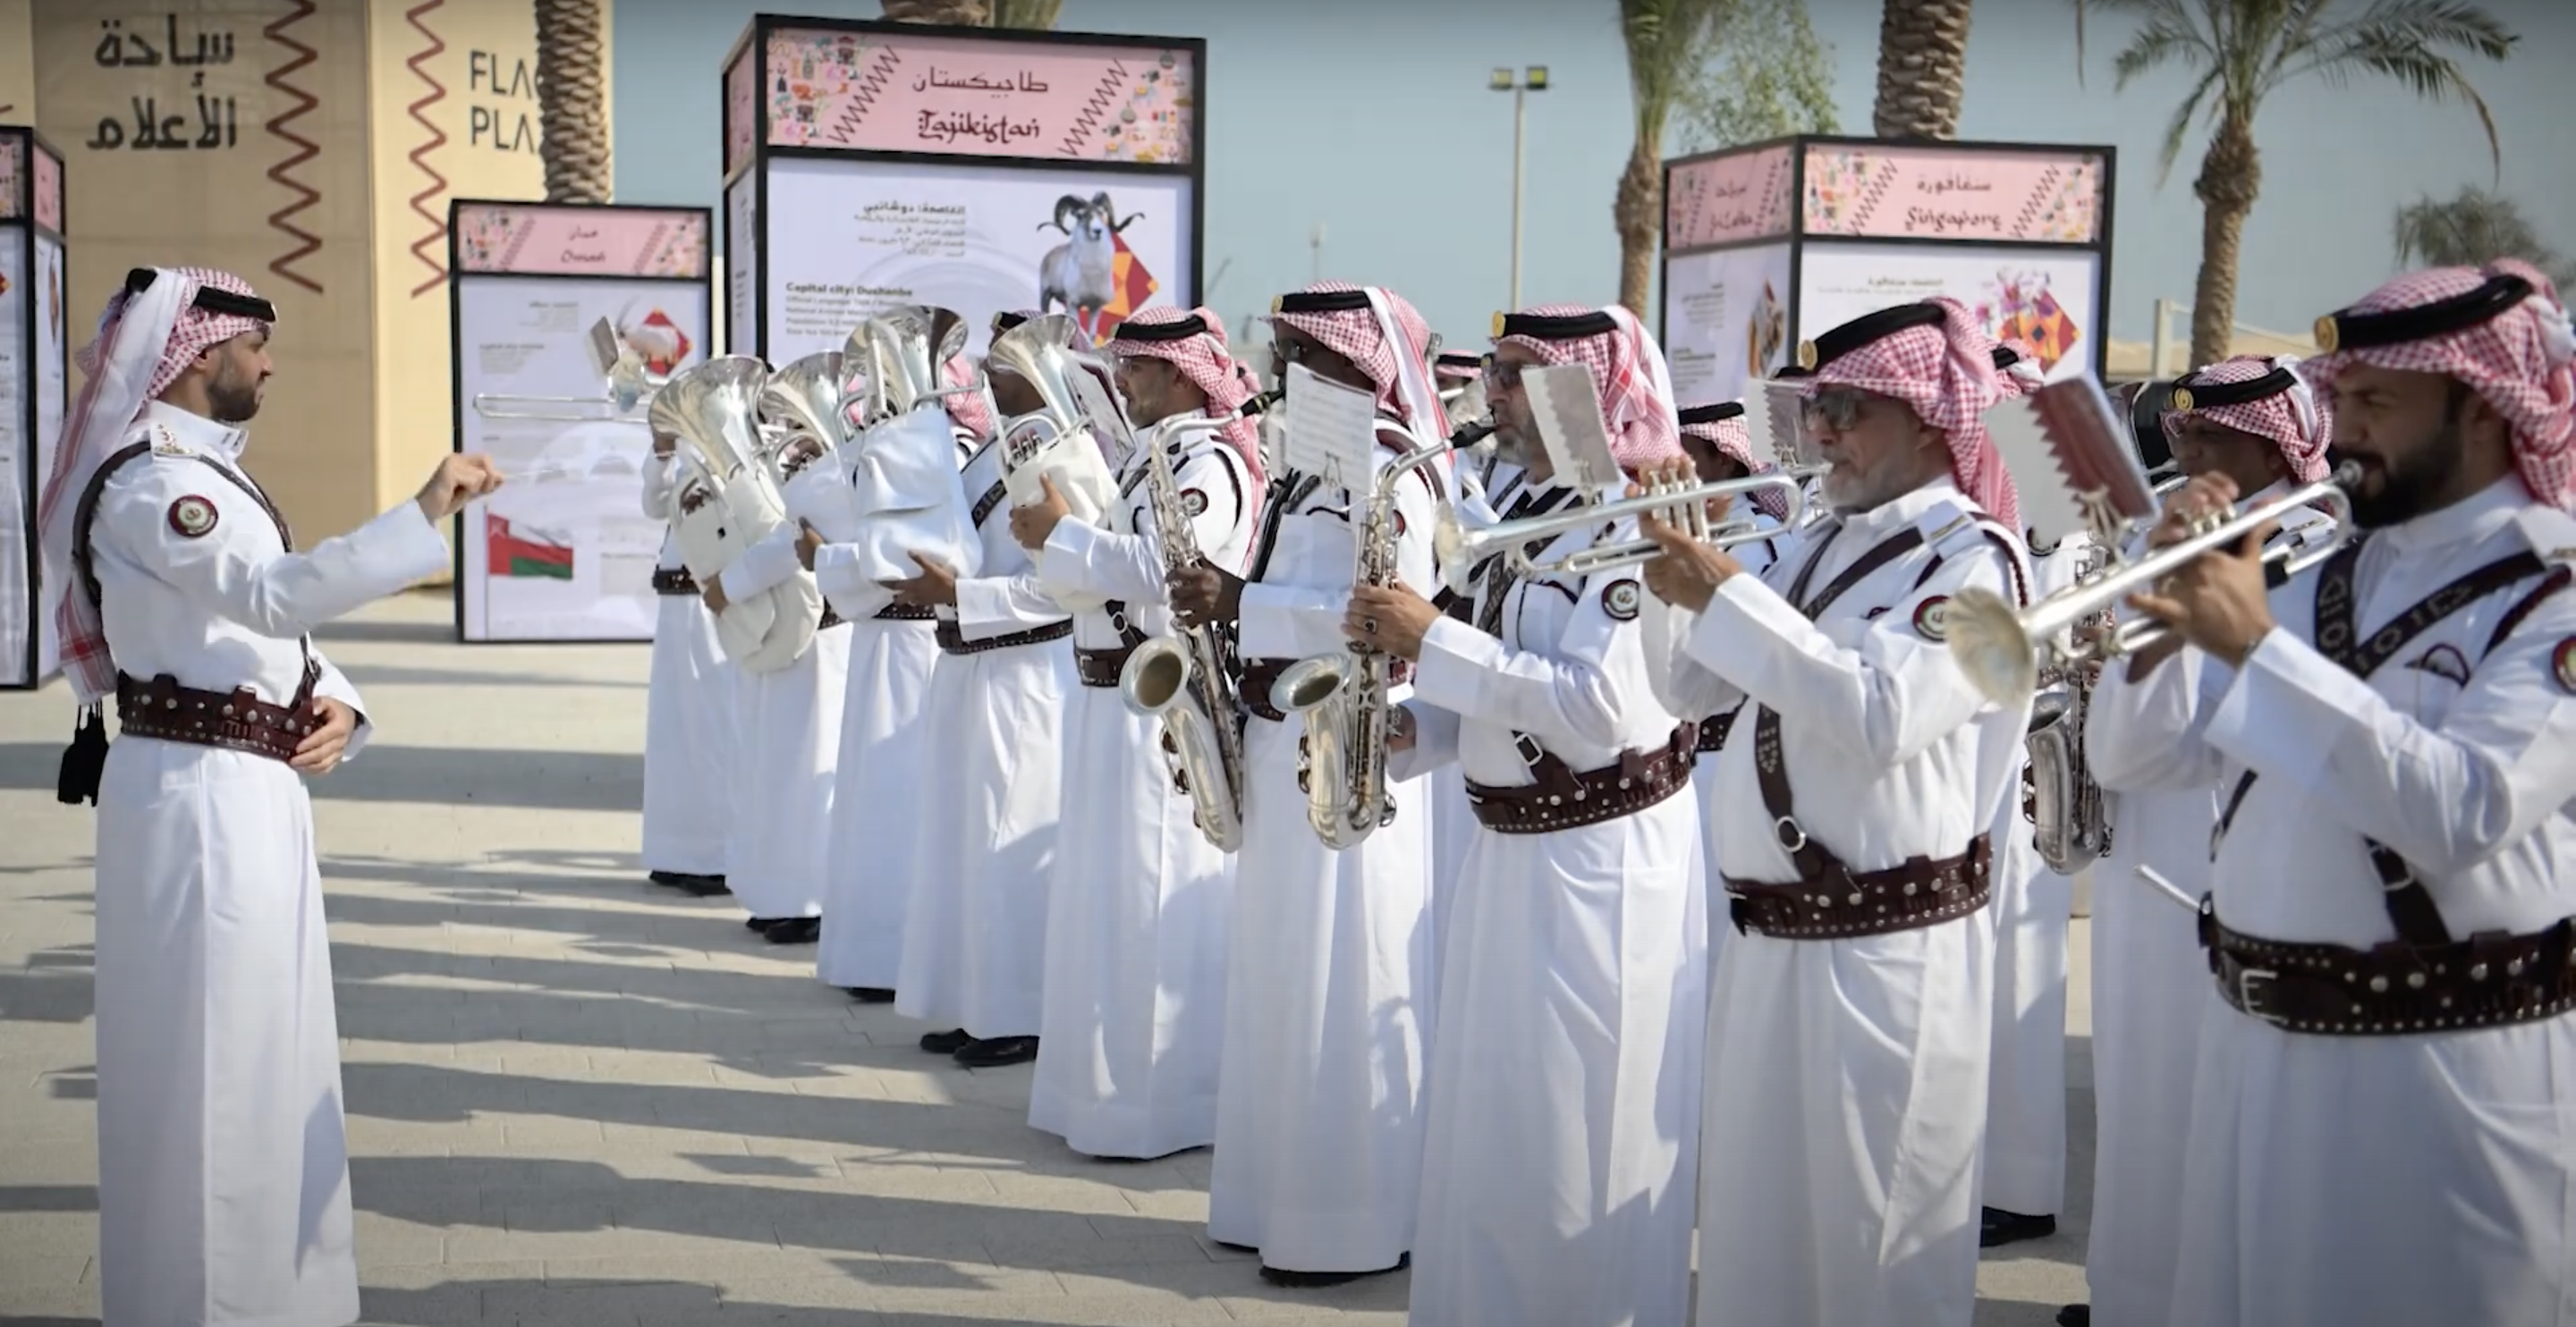 A band wearing traditional Qatari dress play brass instruments outside in the sunshine.